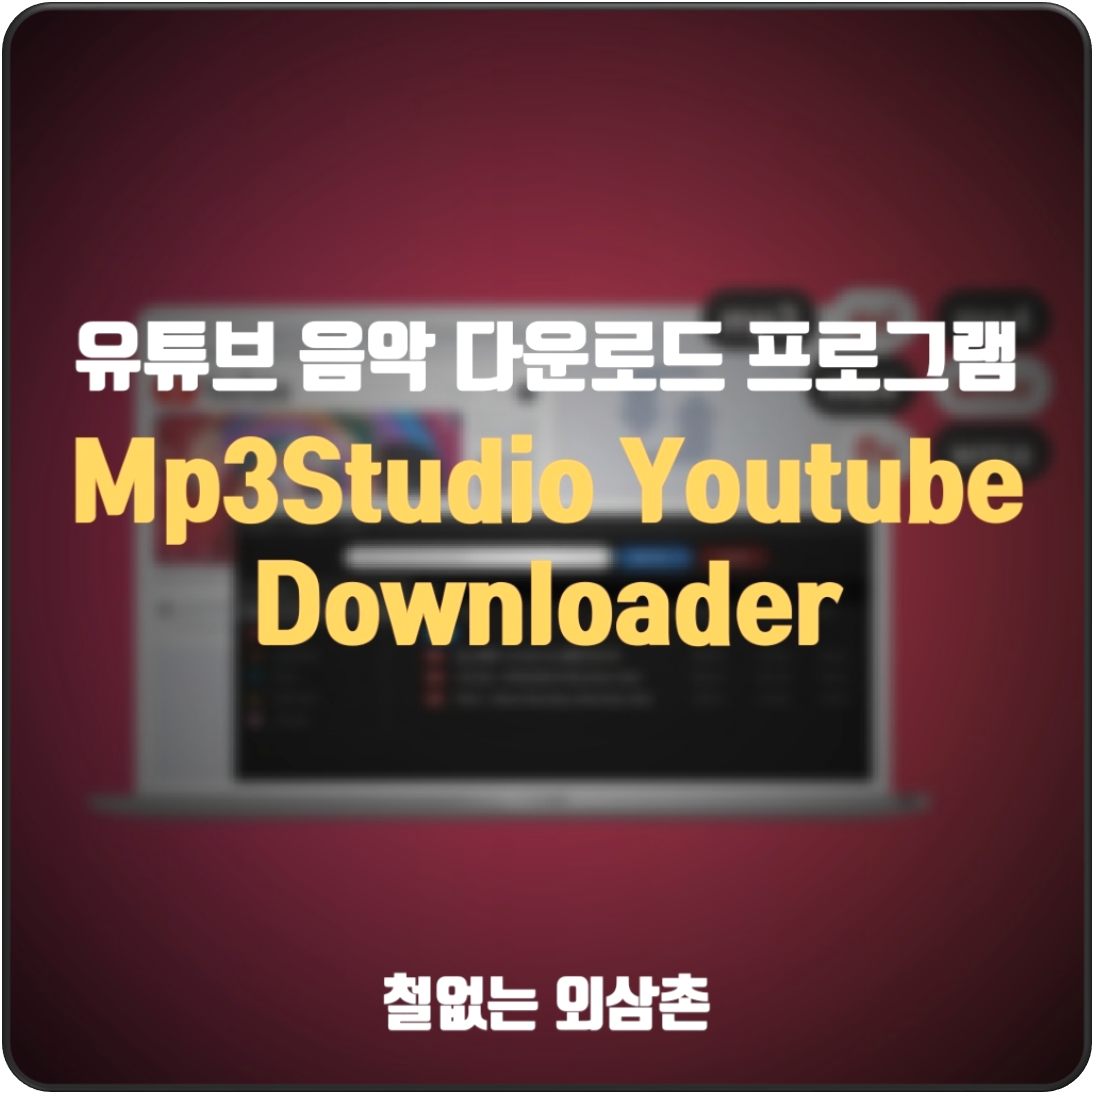 download the new for ios MP3Studio YouTube Downloader 2.0.23